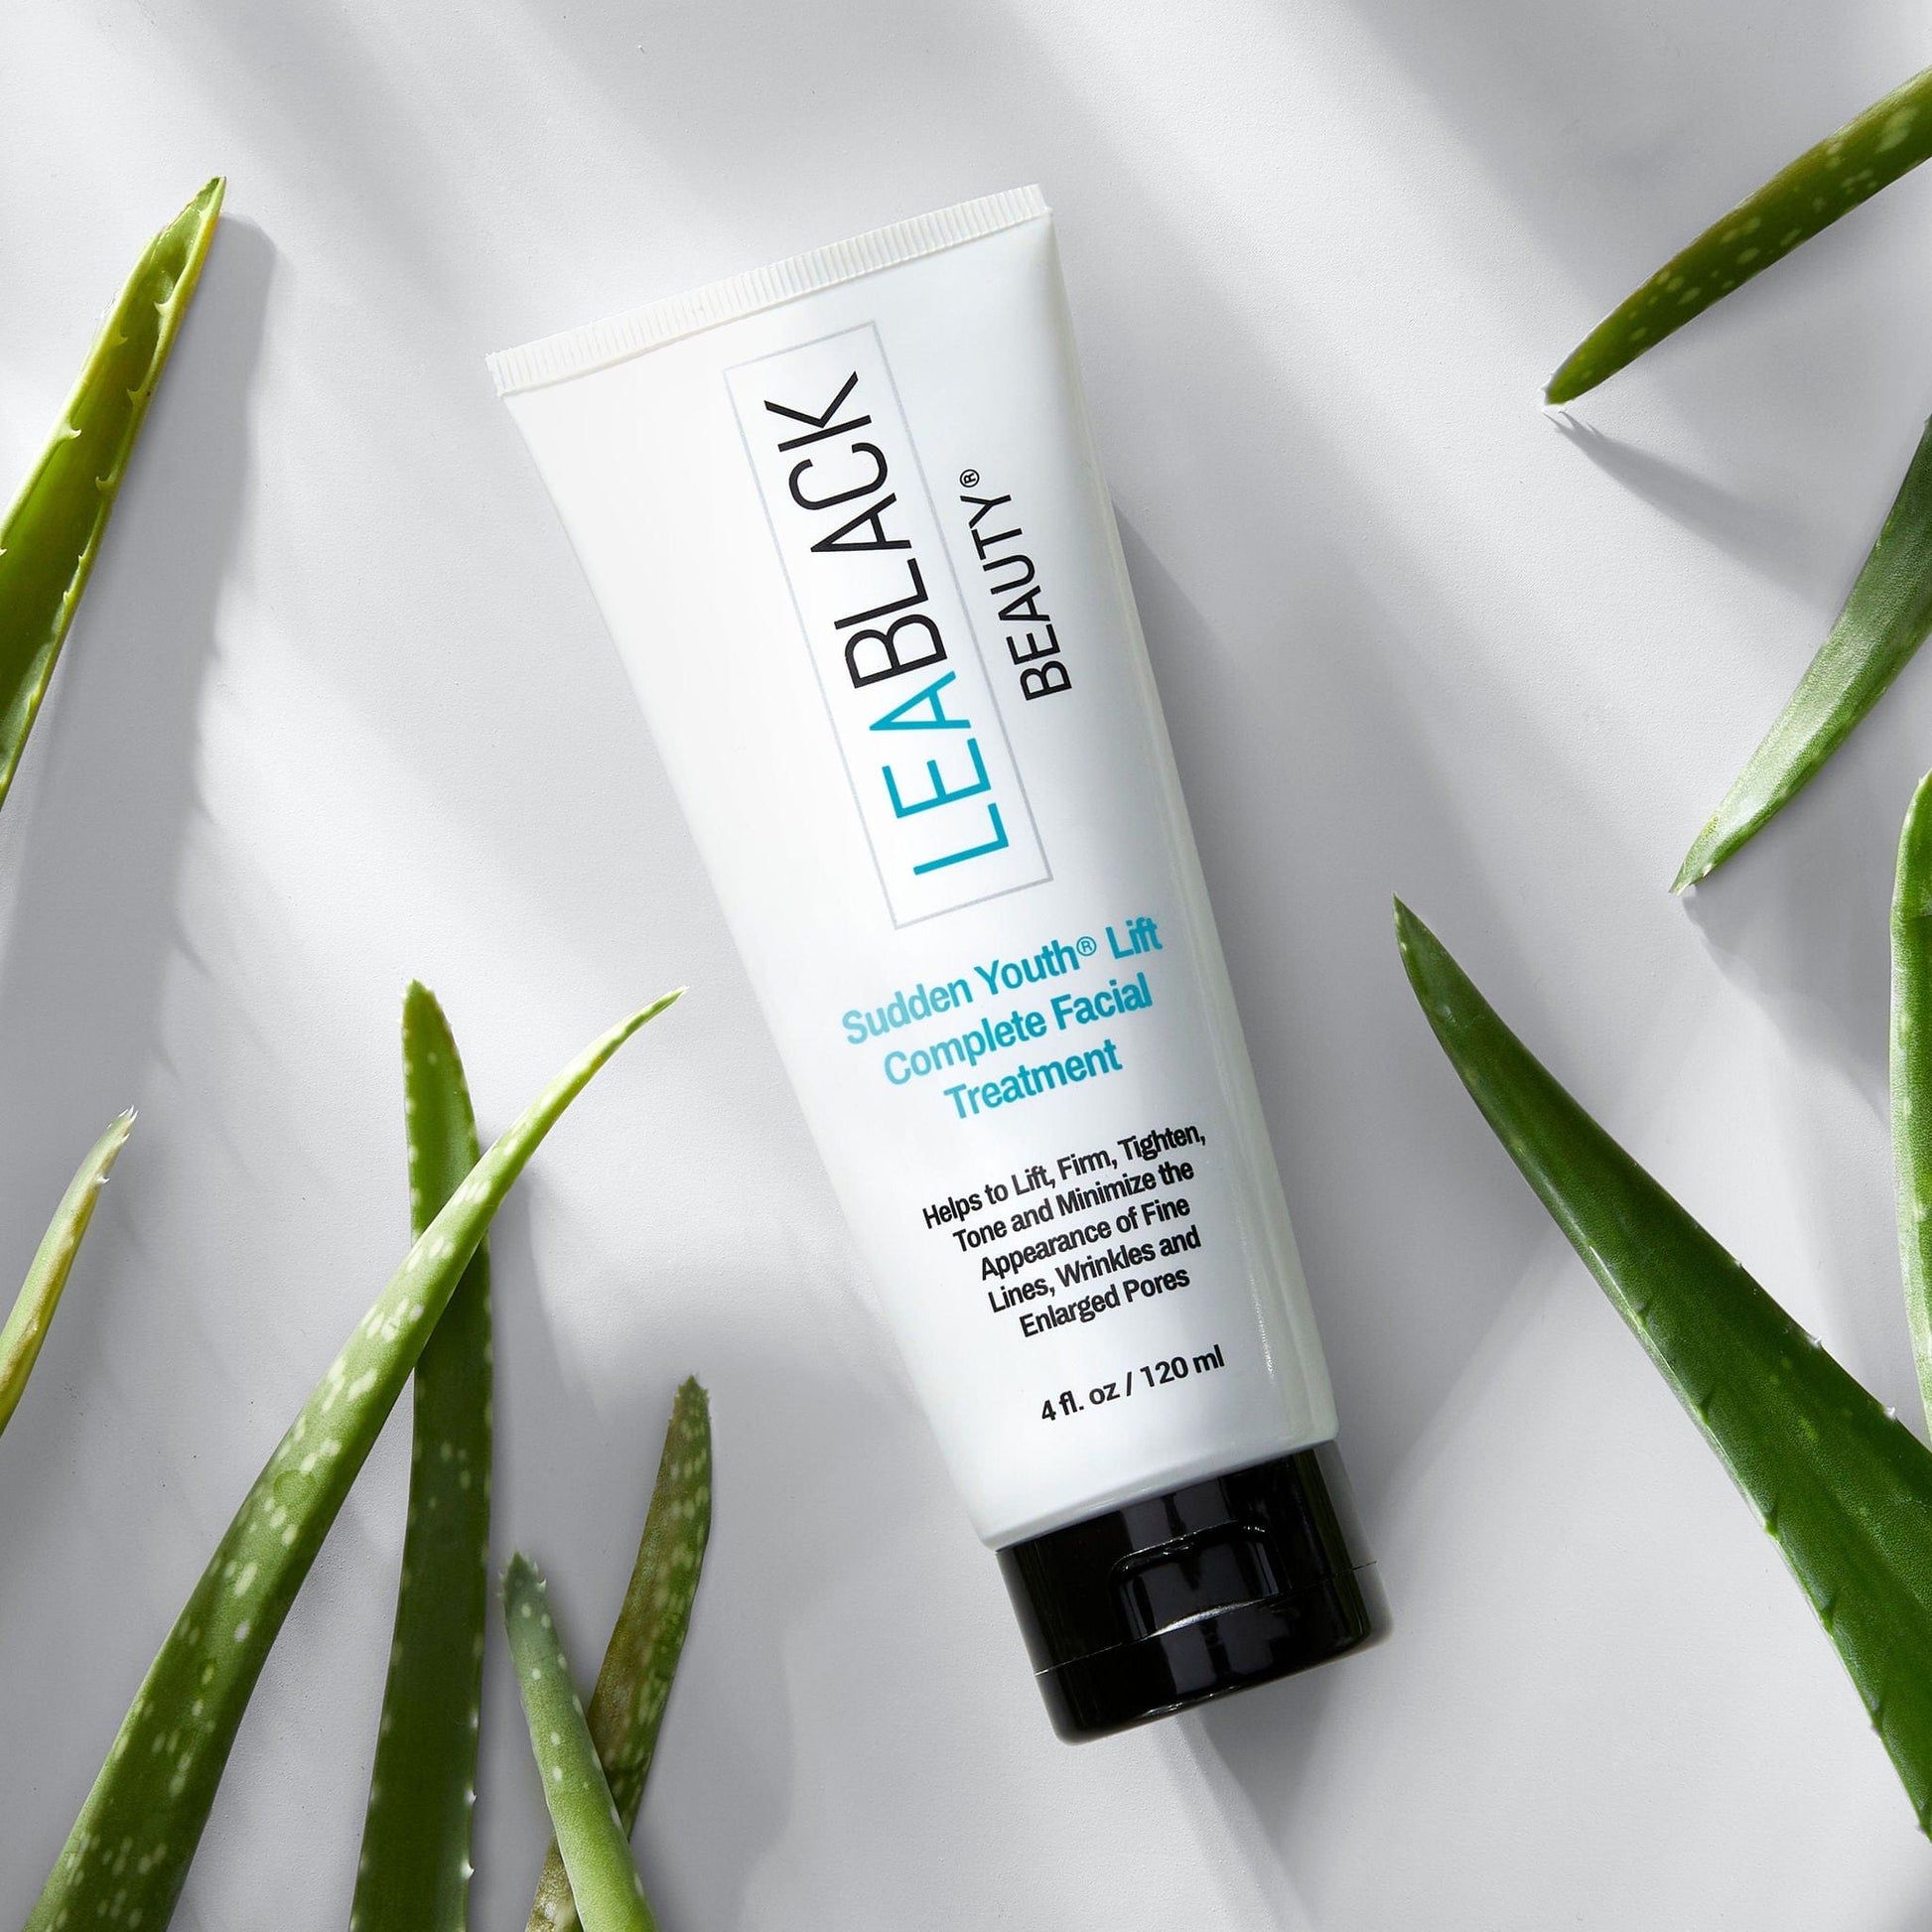 A container of Lea Black Beauty® Sudden Youth® Lift Complete Facial Treatment surrounded by aloe plants